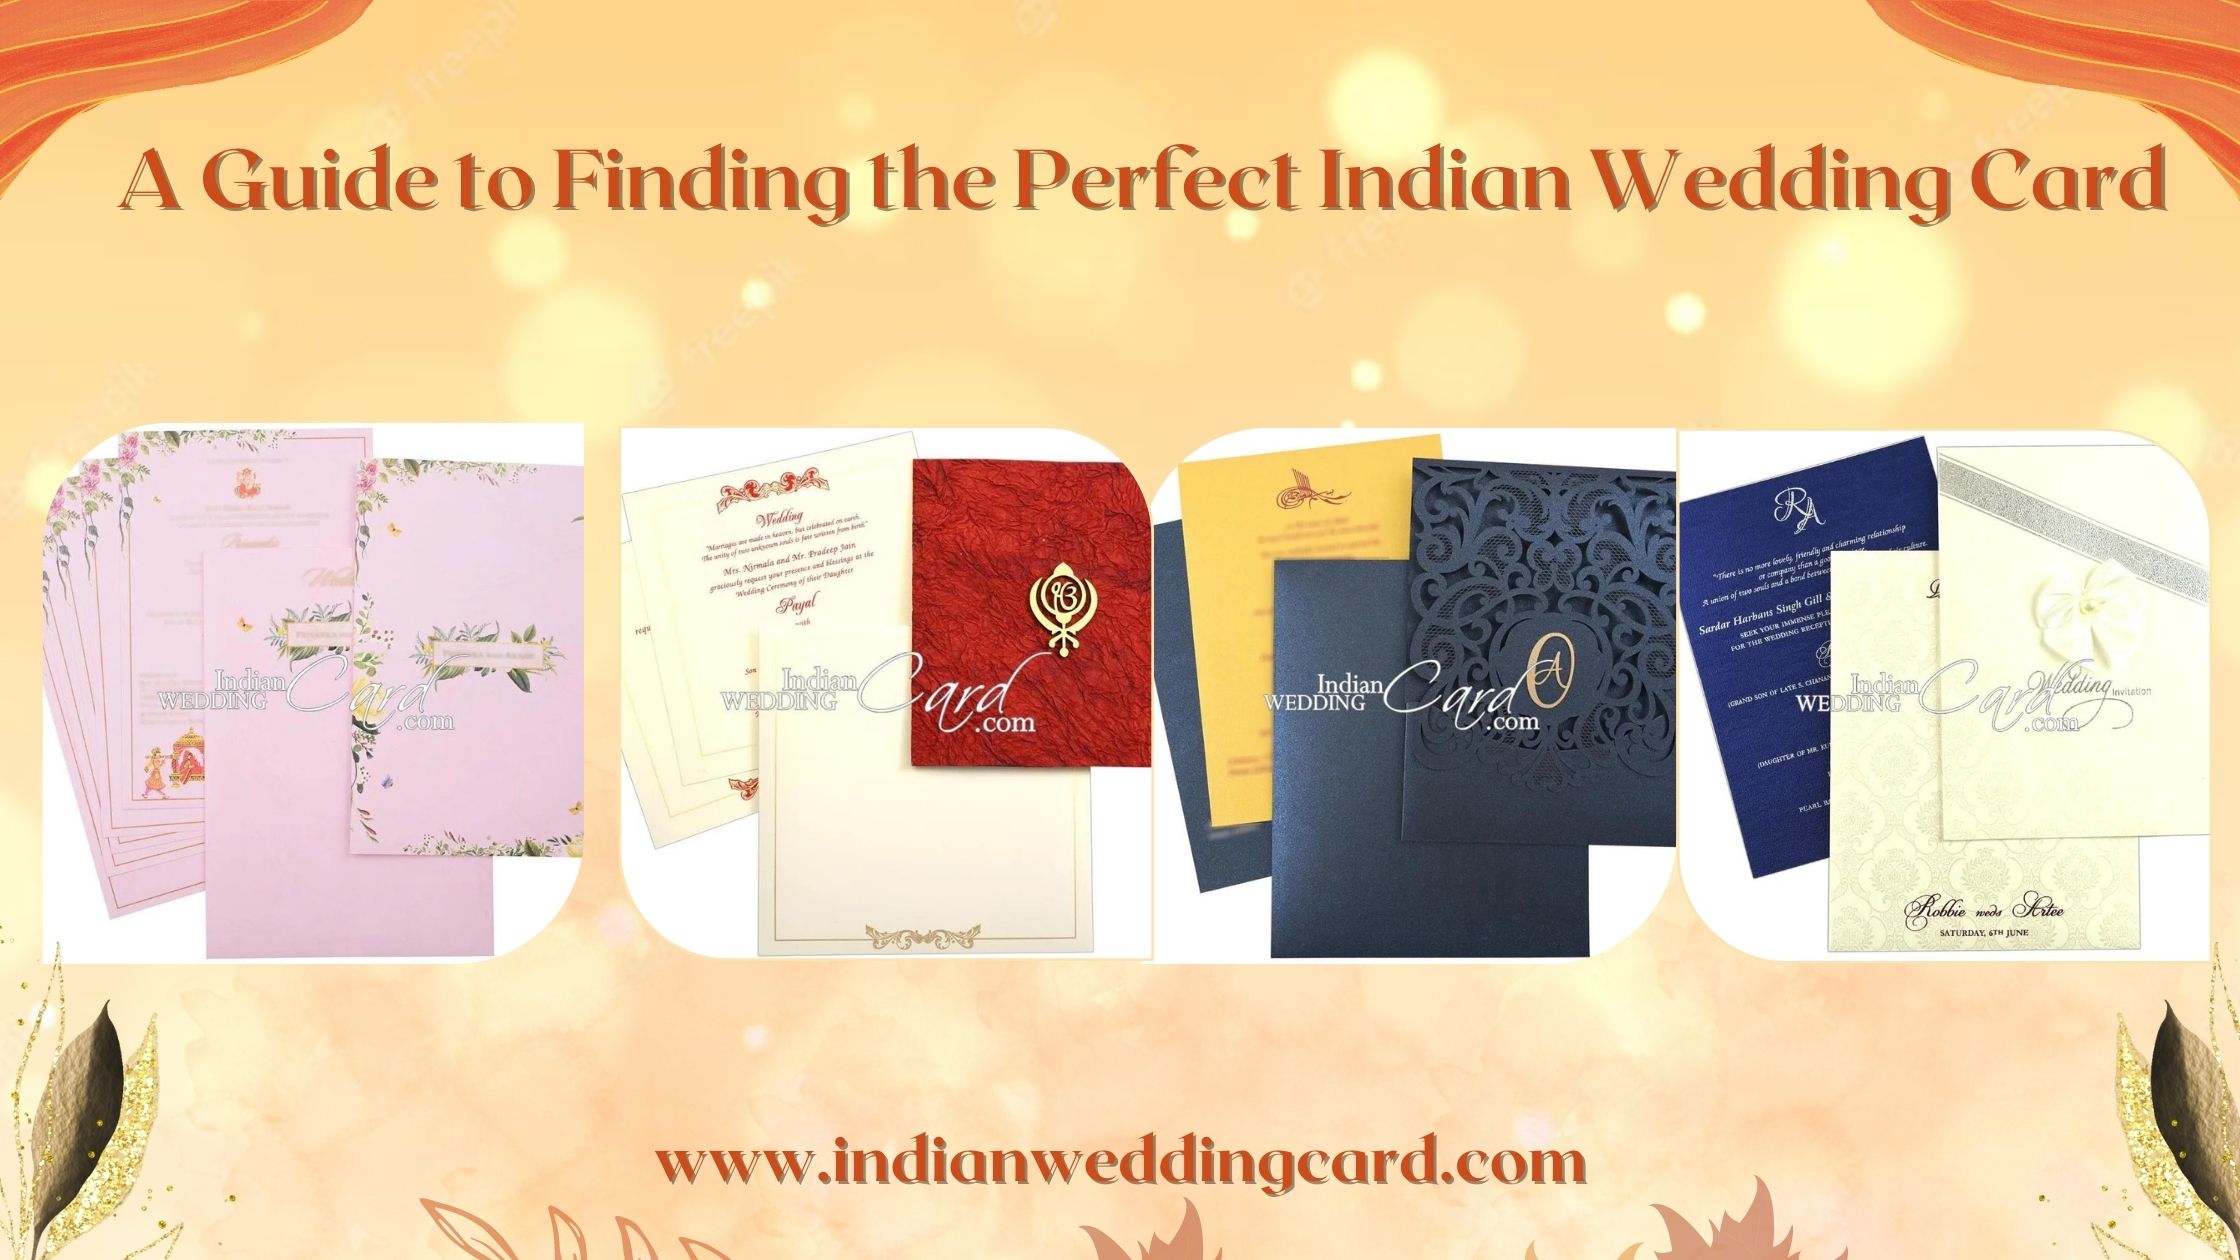 A Guide to Finding the Perfect Indian Wedding Card